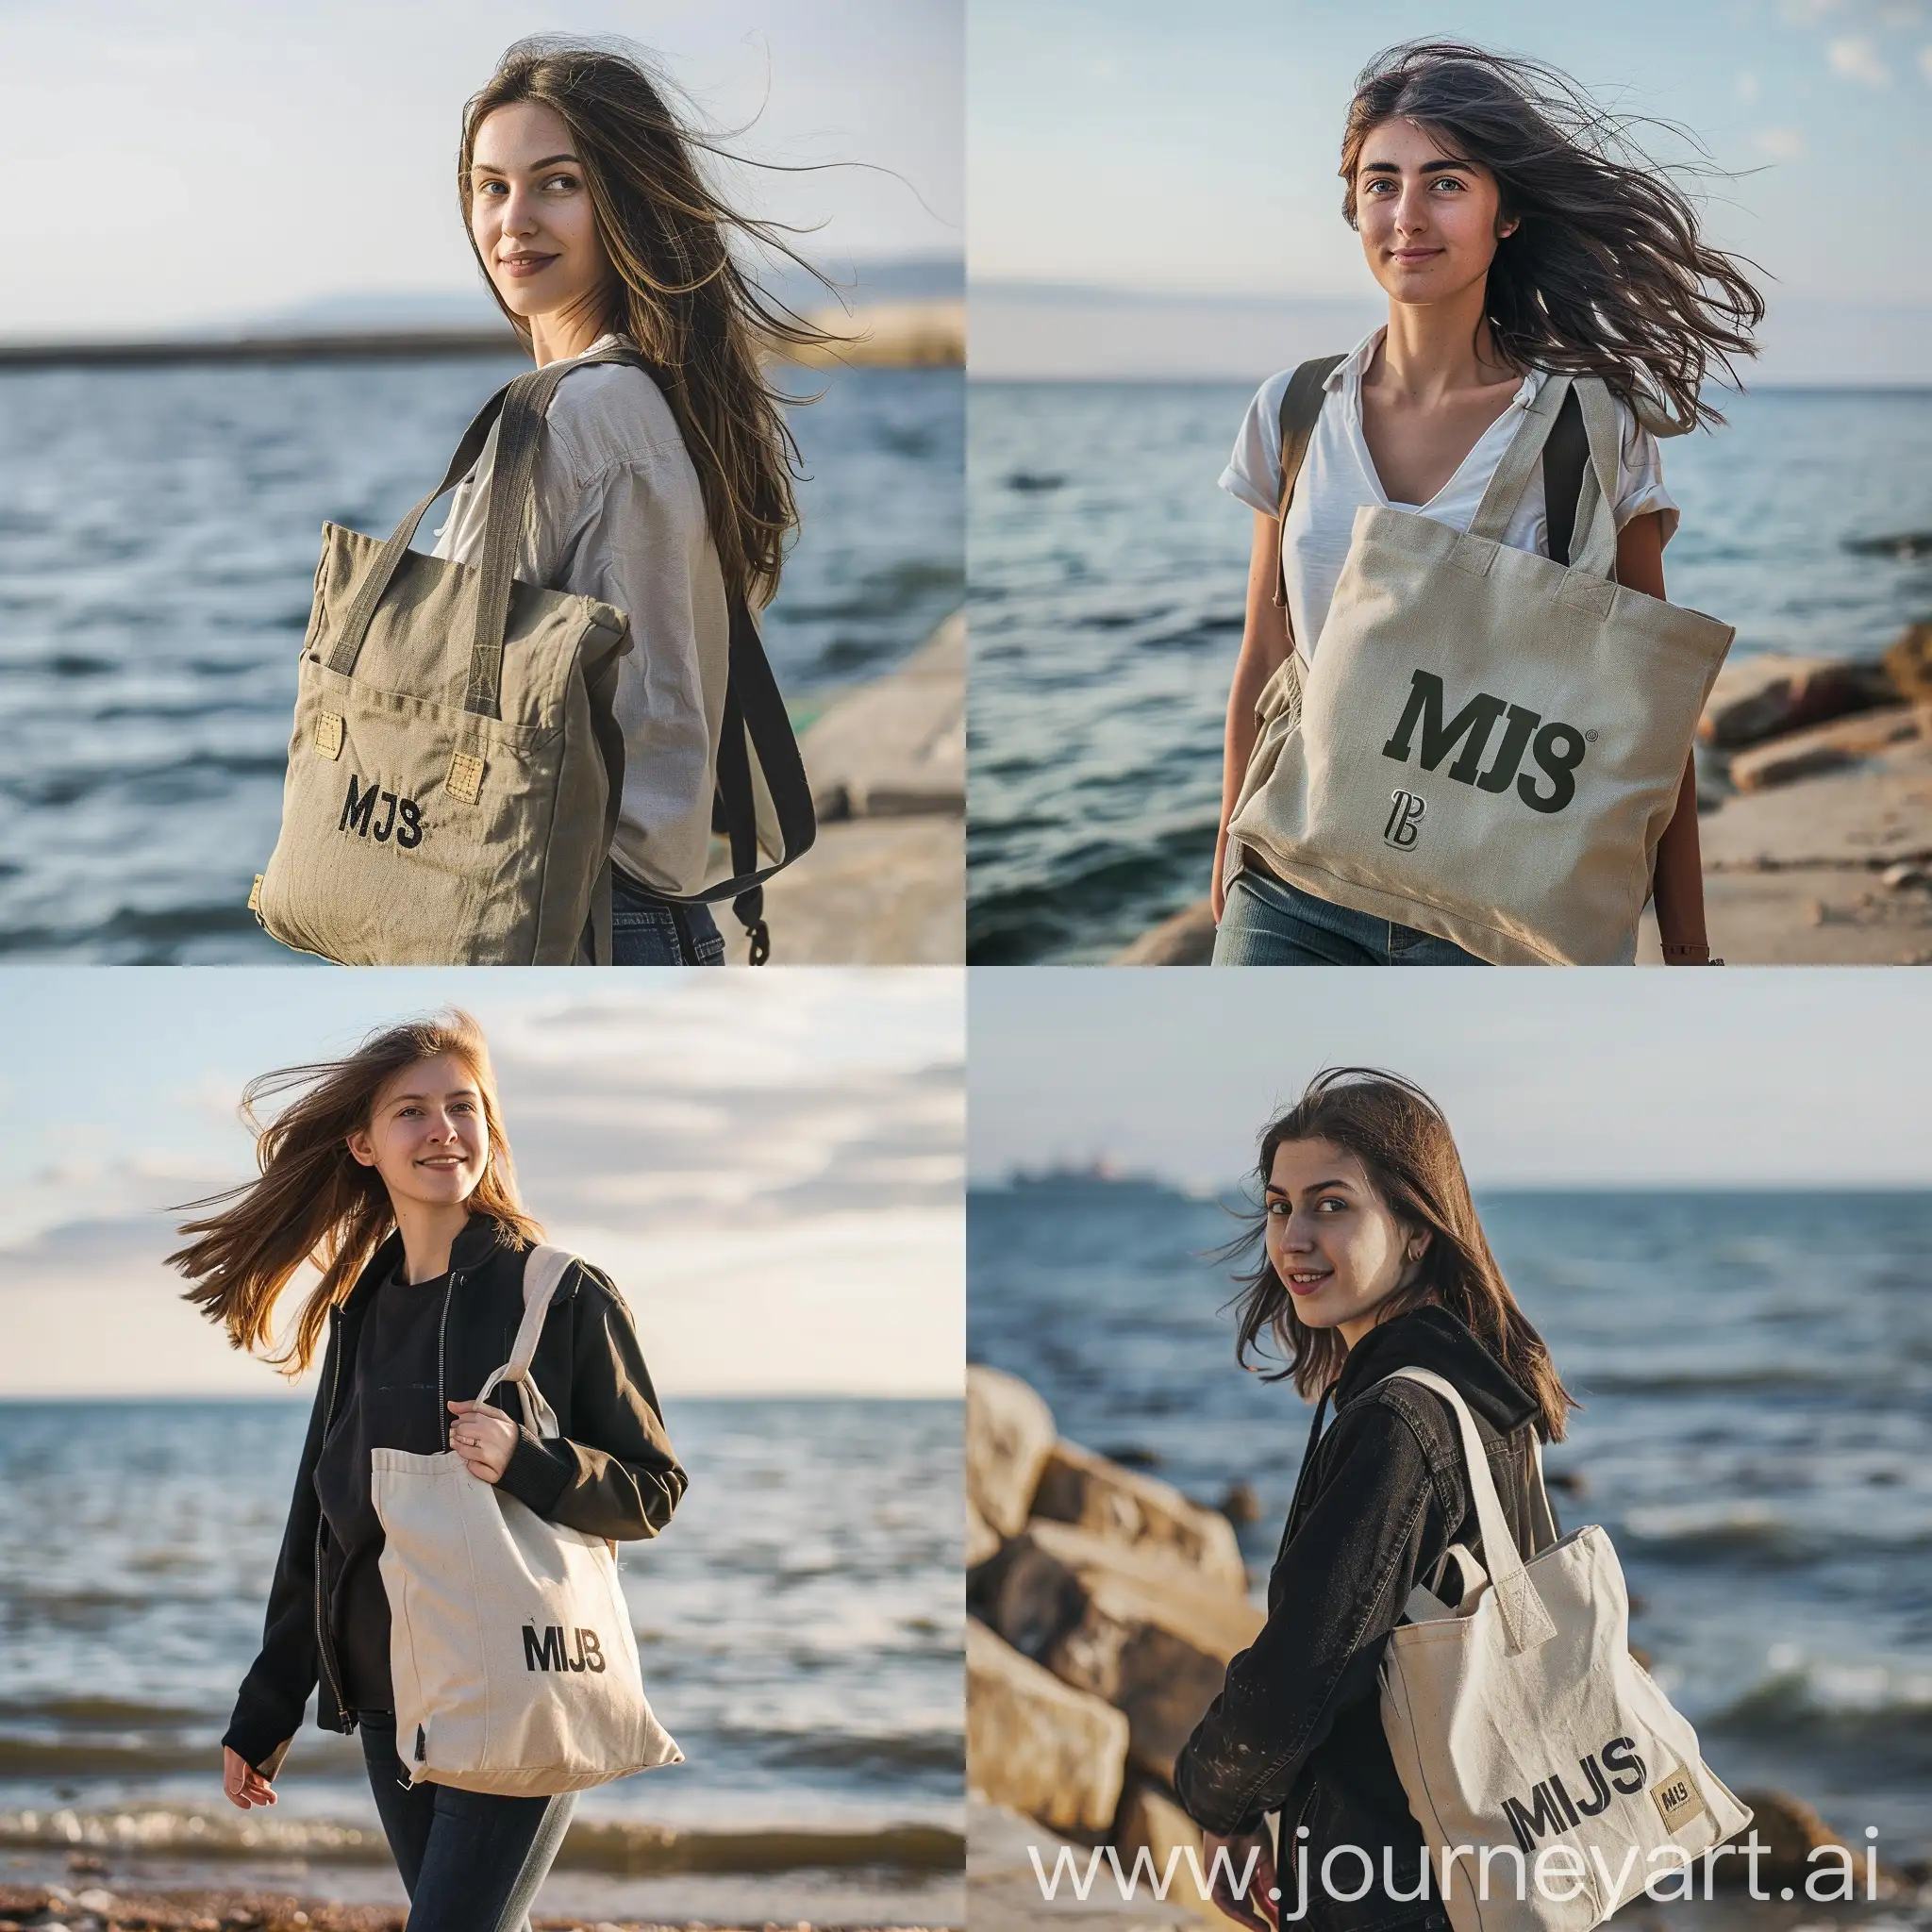 A young woman is carrying a canvas bag with MJS printed on it. Walking by the seaside feels very relaxed.